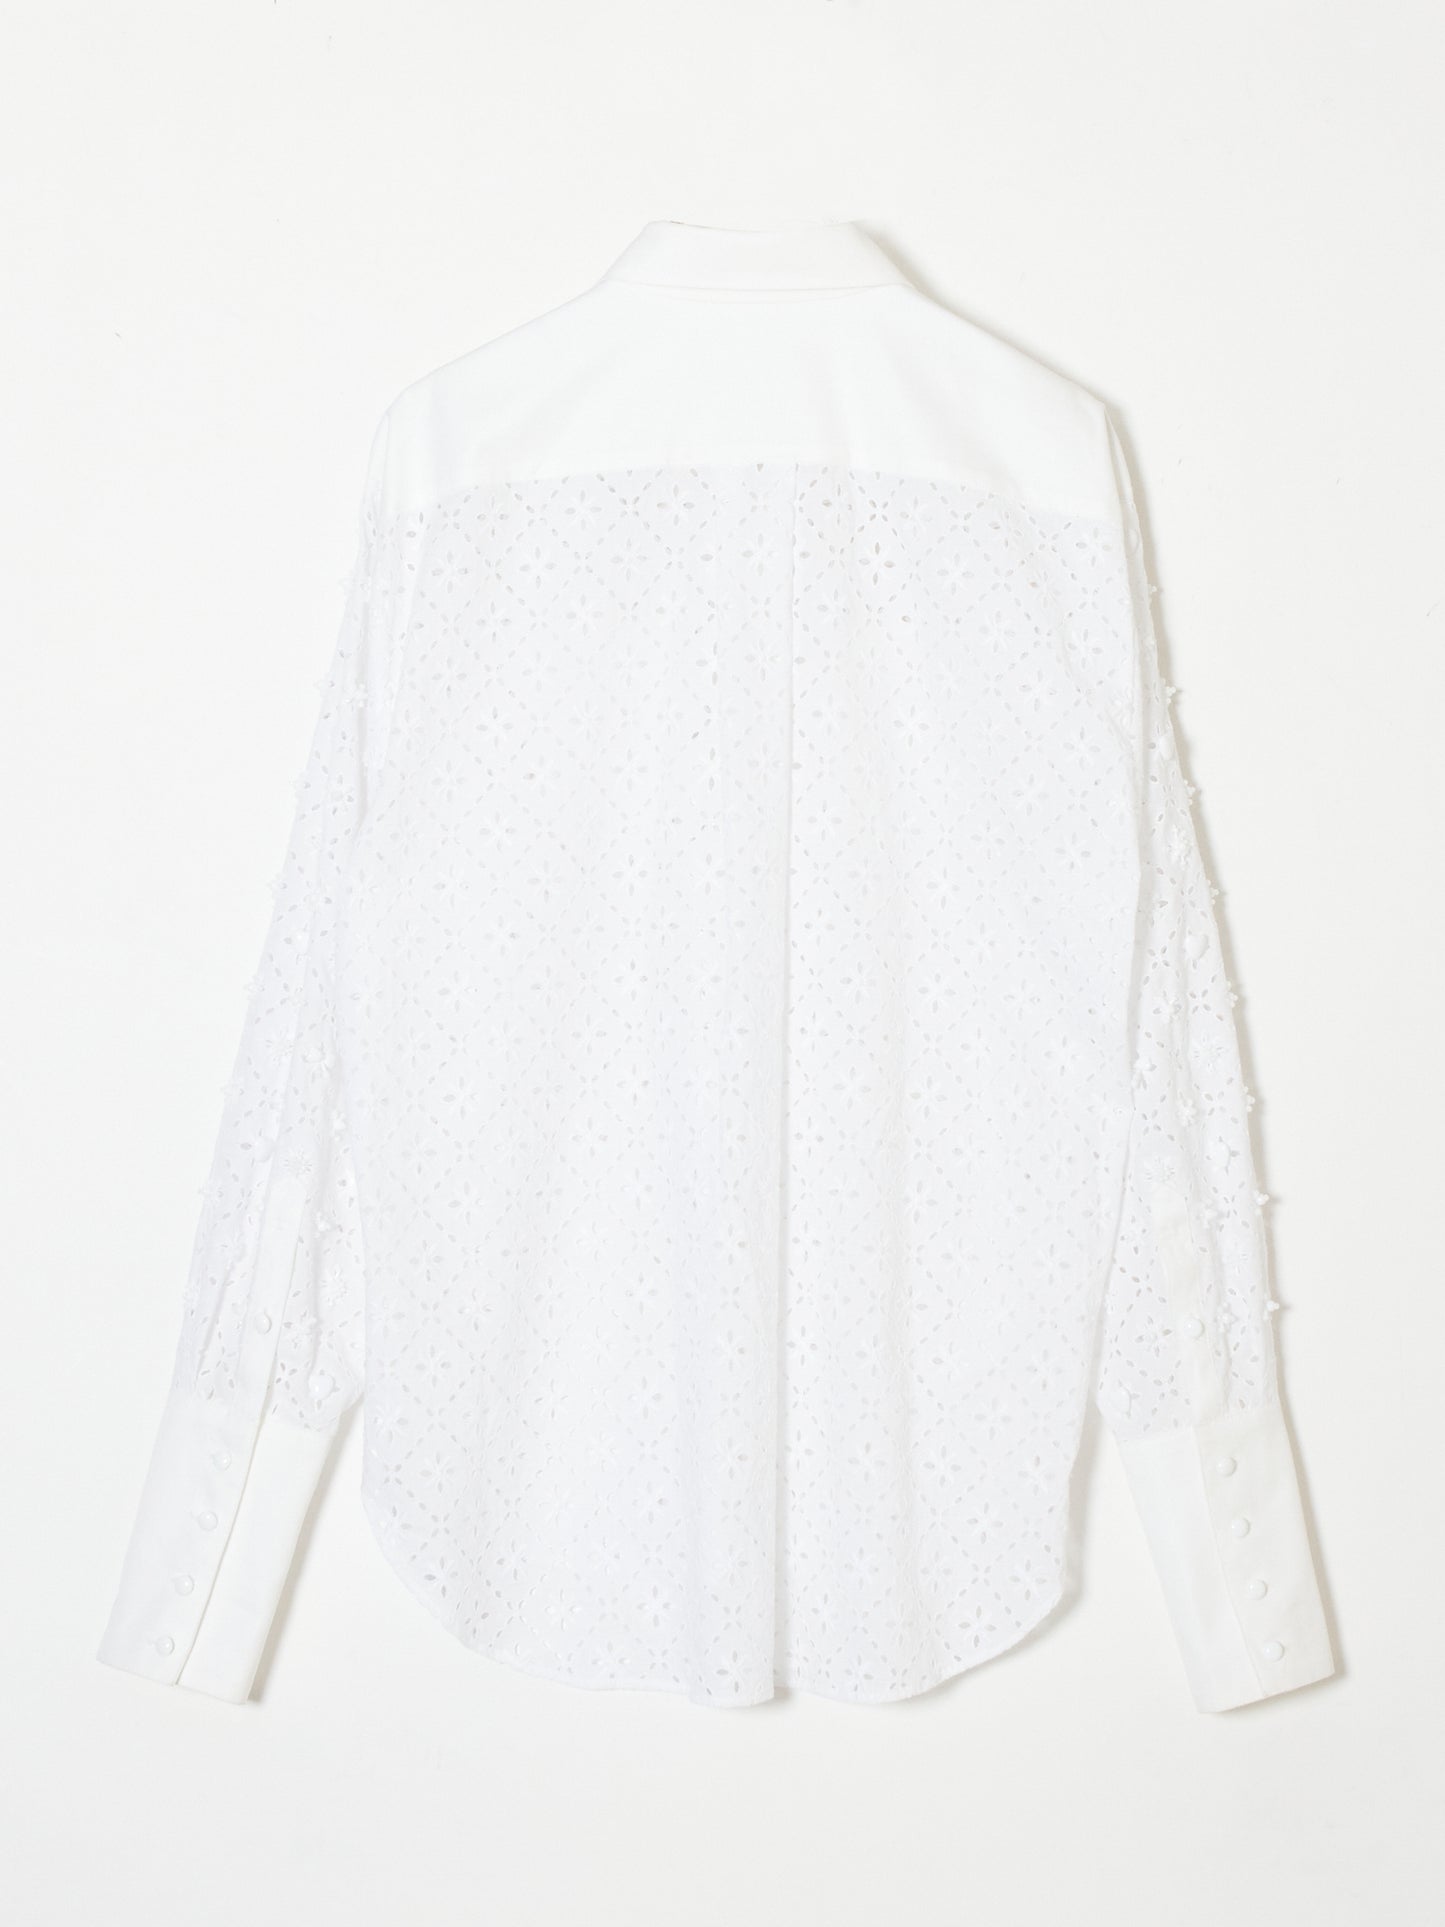 white beads shirt【Delivery in January 2023】